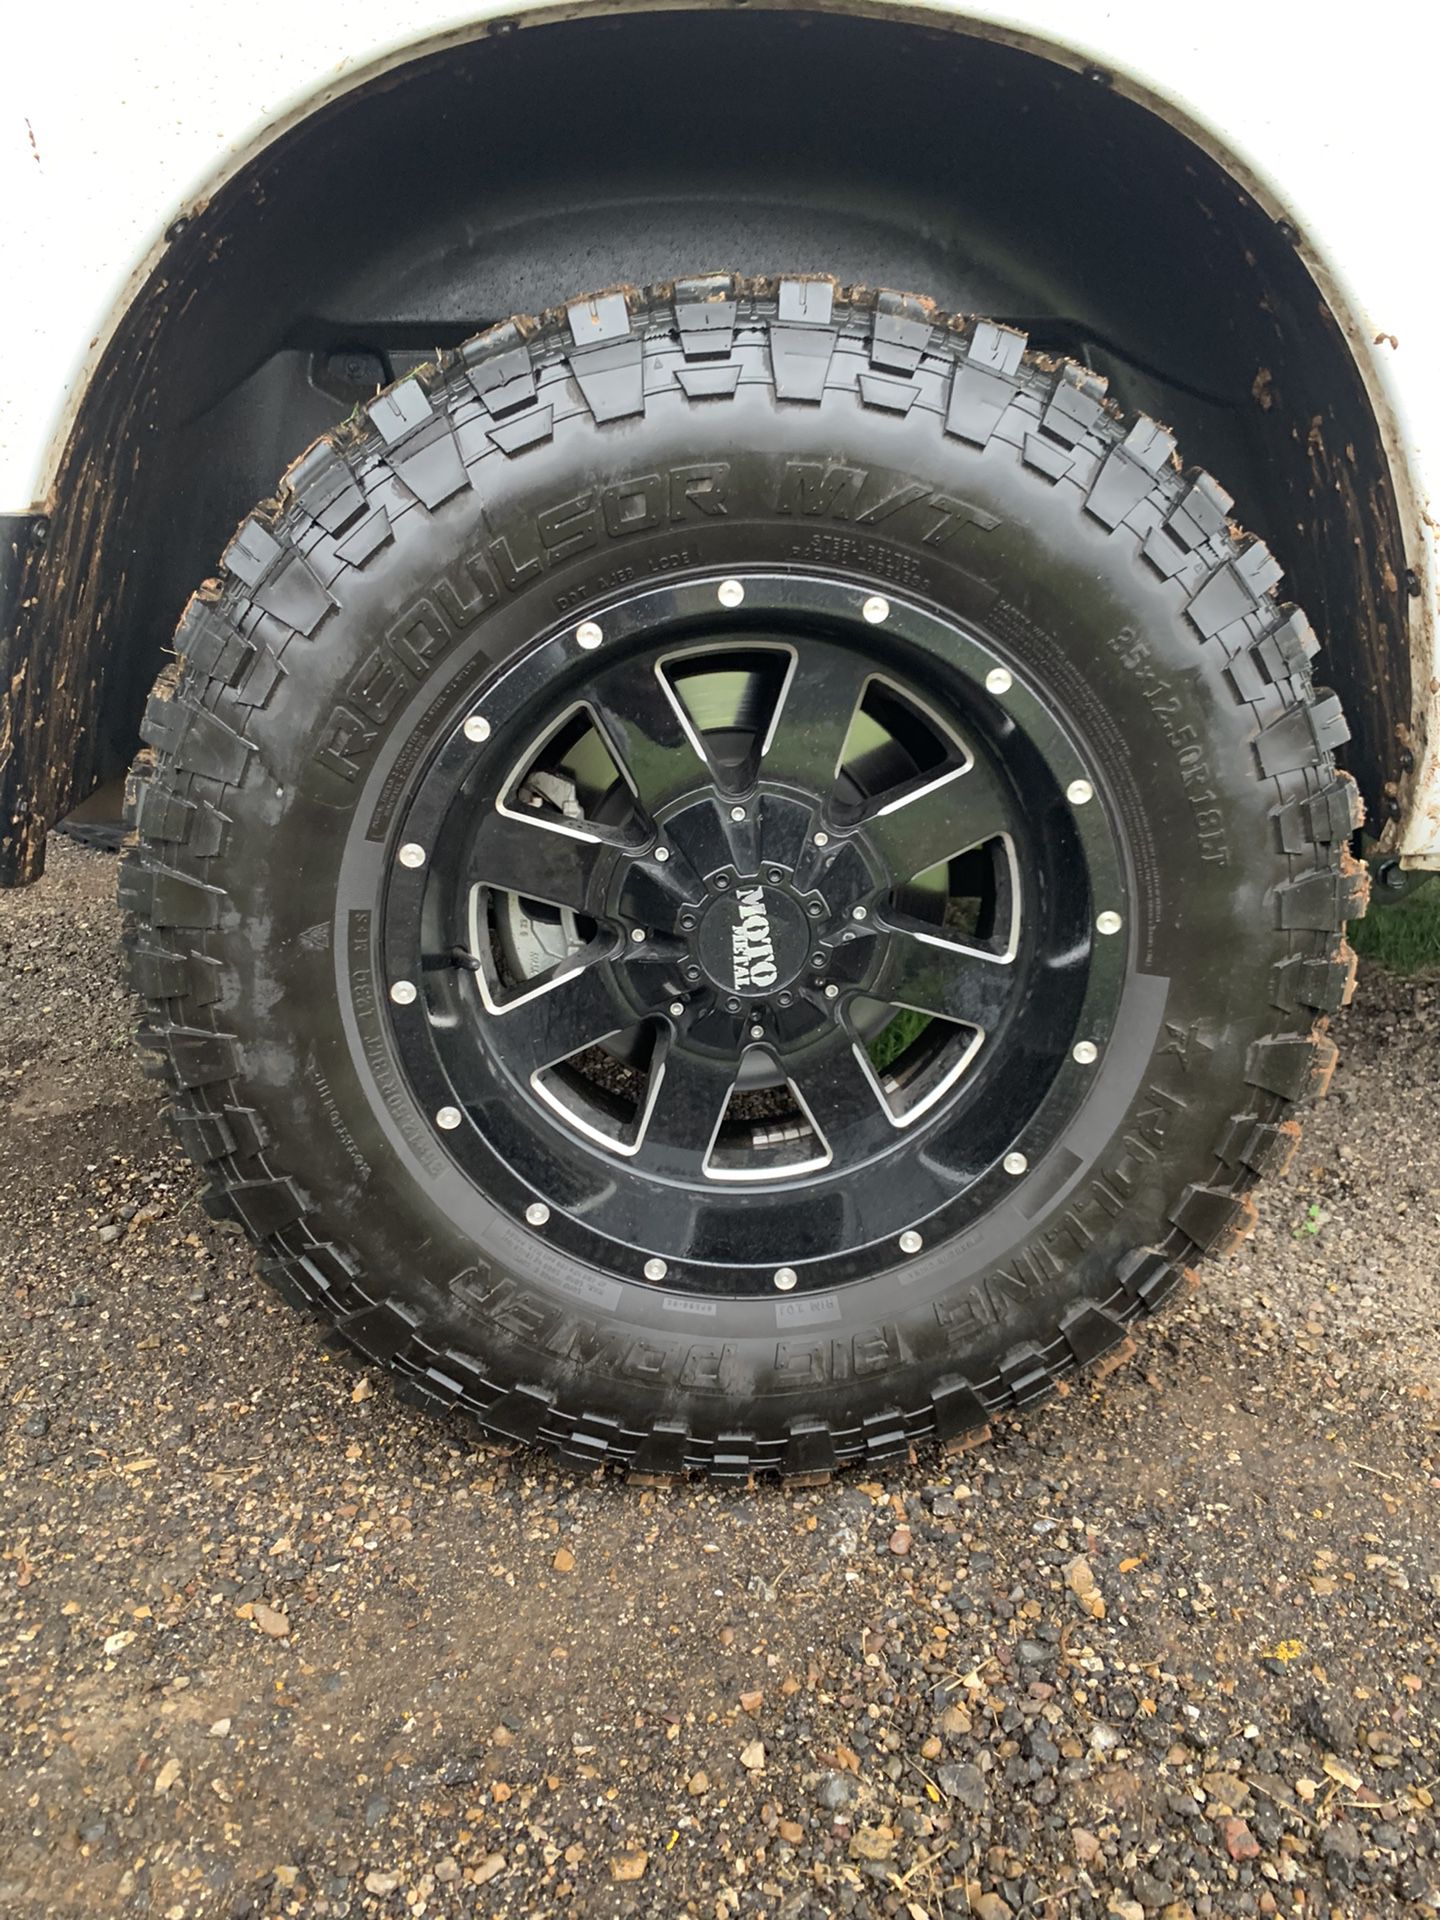 Full Set of Rolling Big Power Tires 35x12.5 and Motto Metal wheels 18 inch